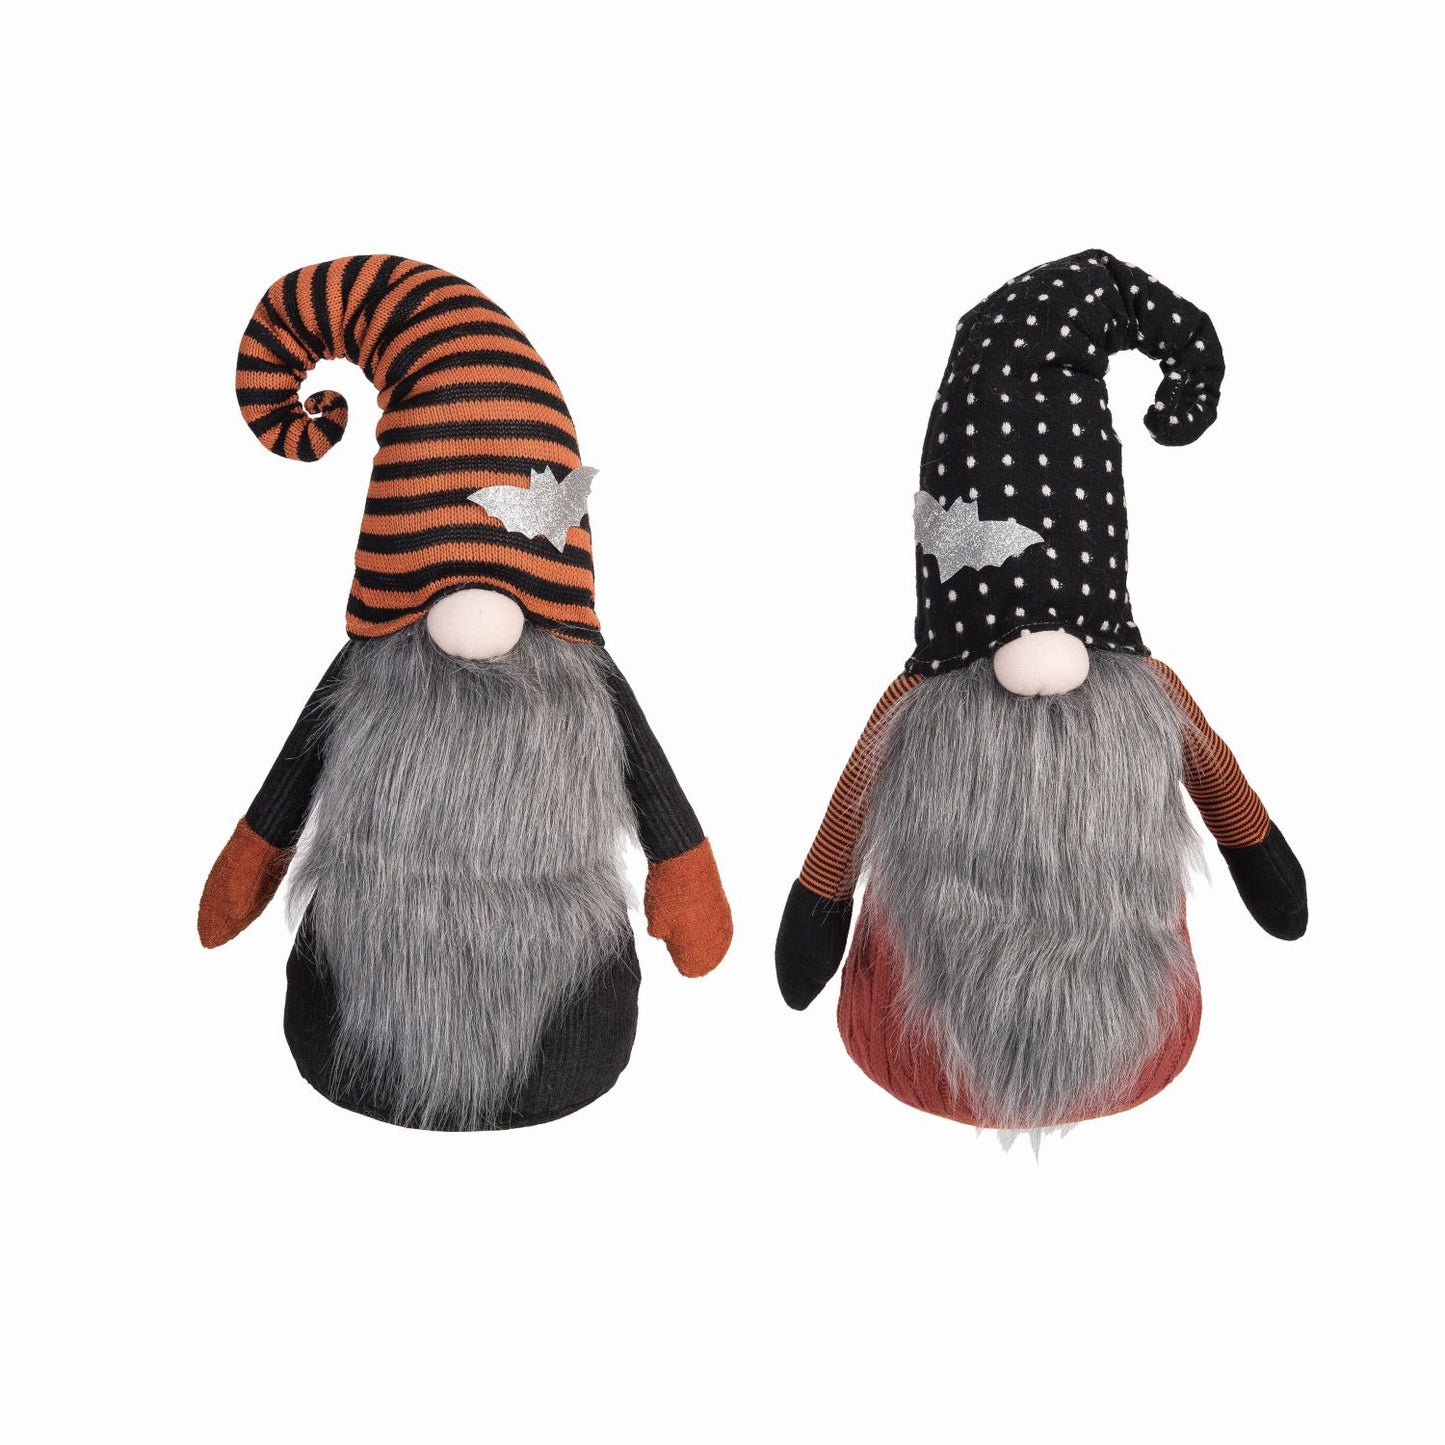 Transpac Plush Gnome With Hat Sitter, Set Of 2, Assortment